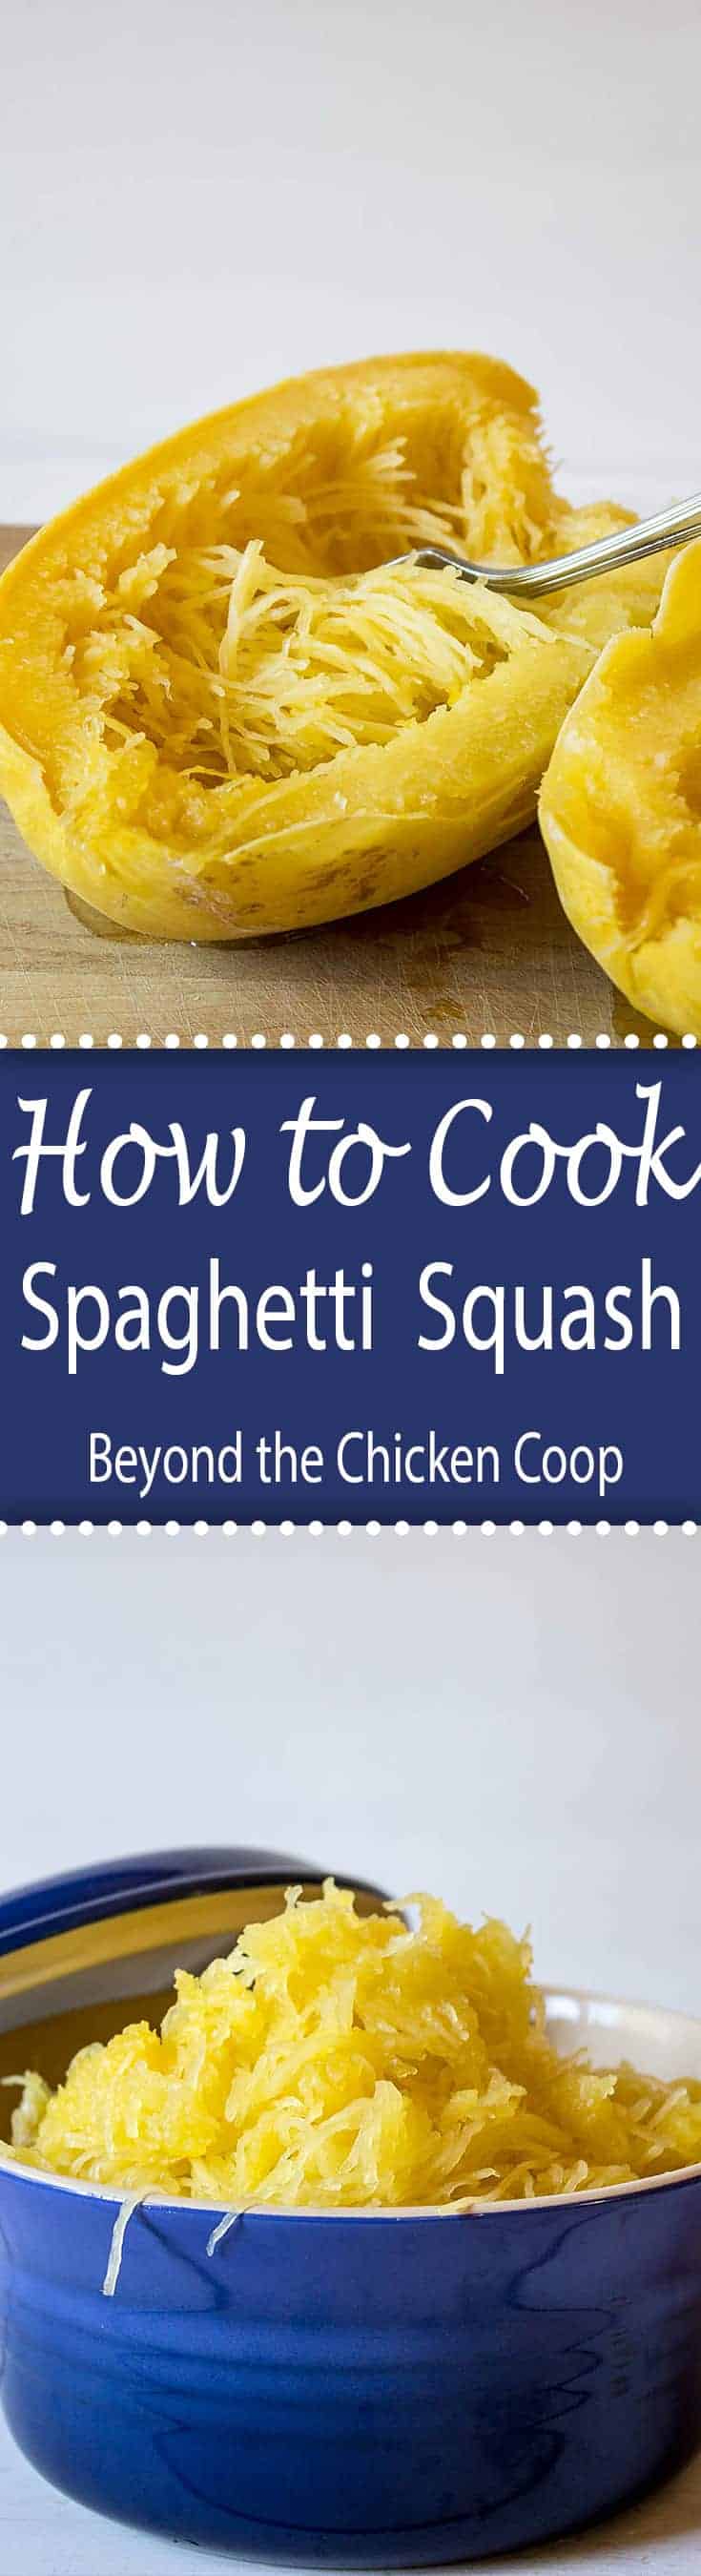 Spaghetti Squash Boiled Whole - Beyond The Chicken Coop